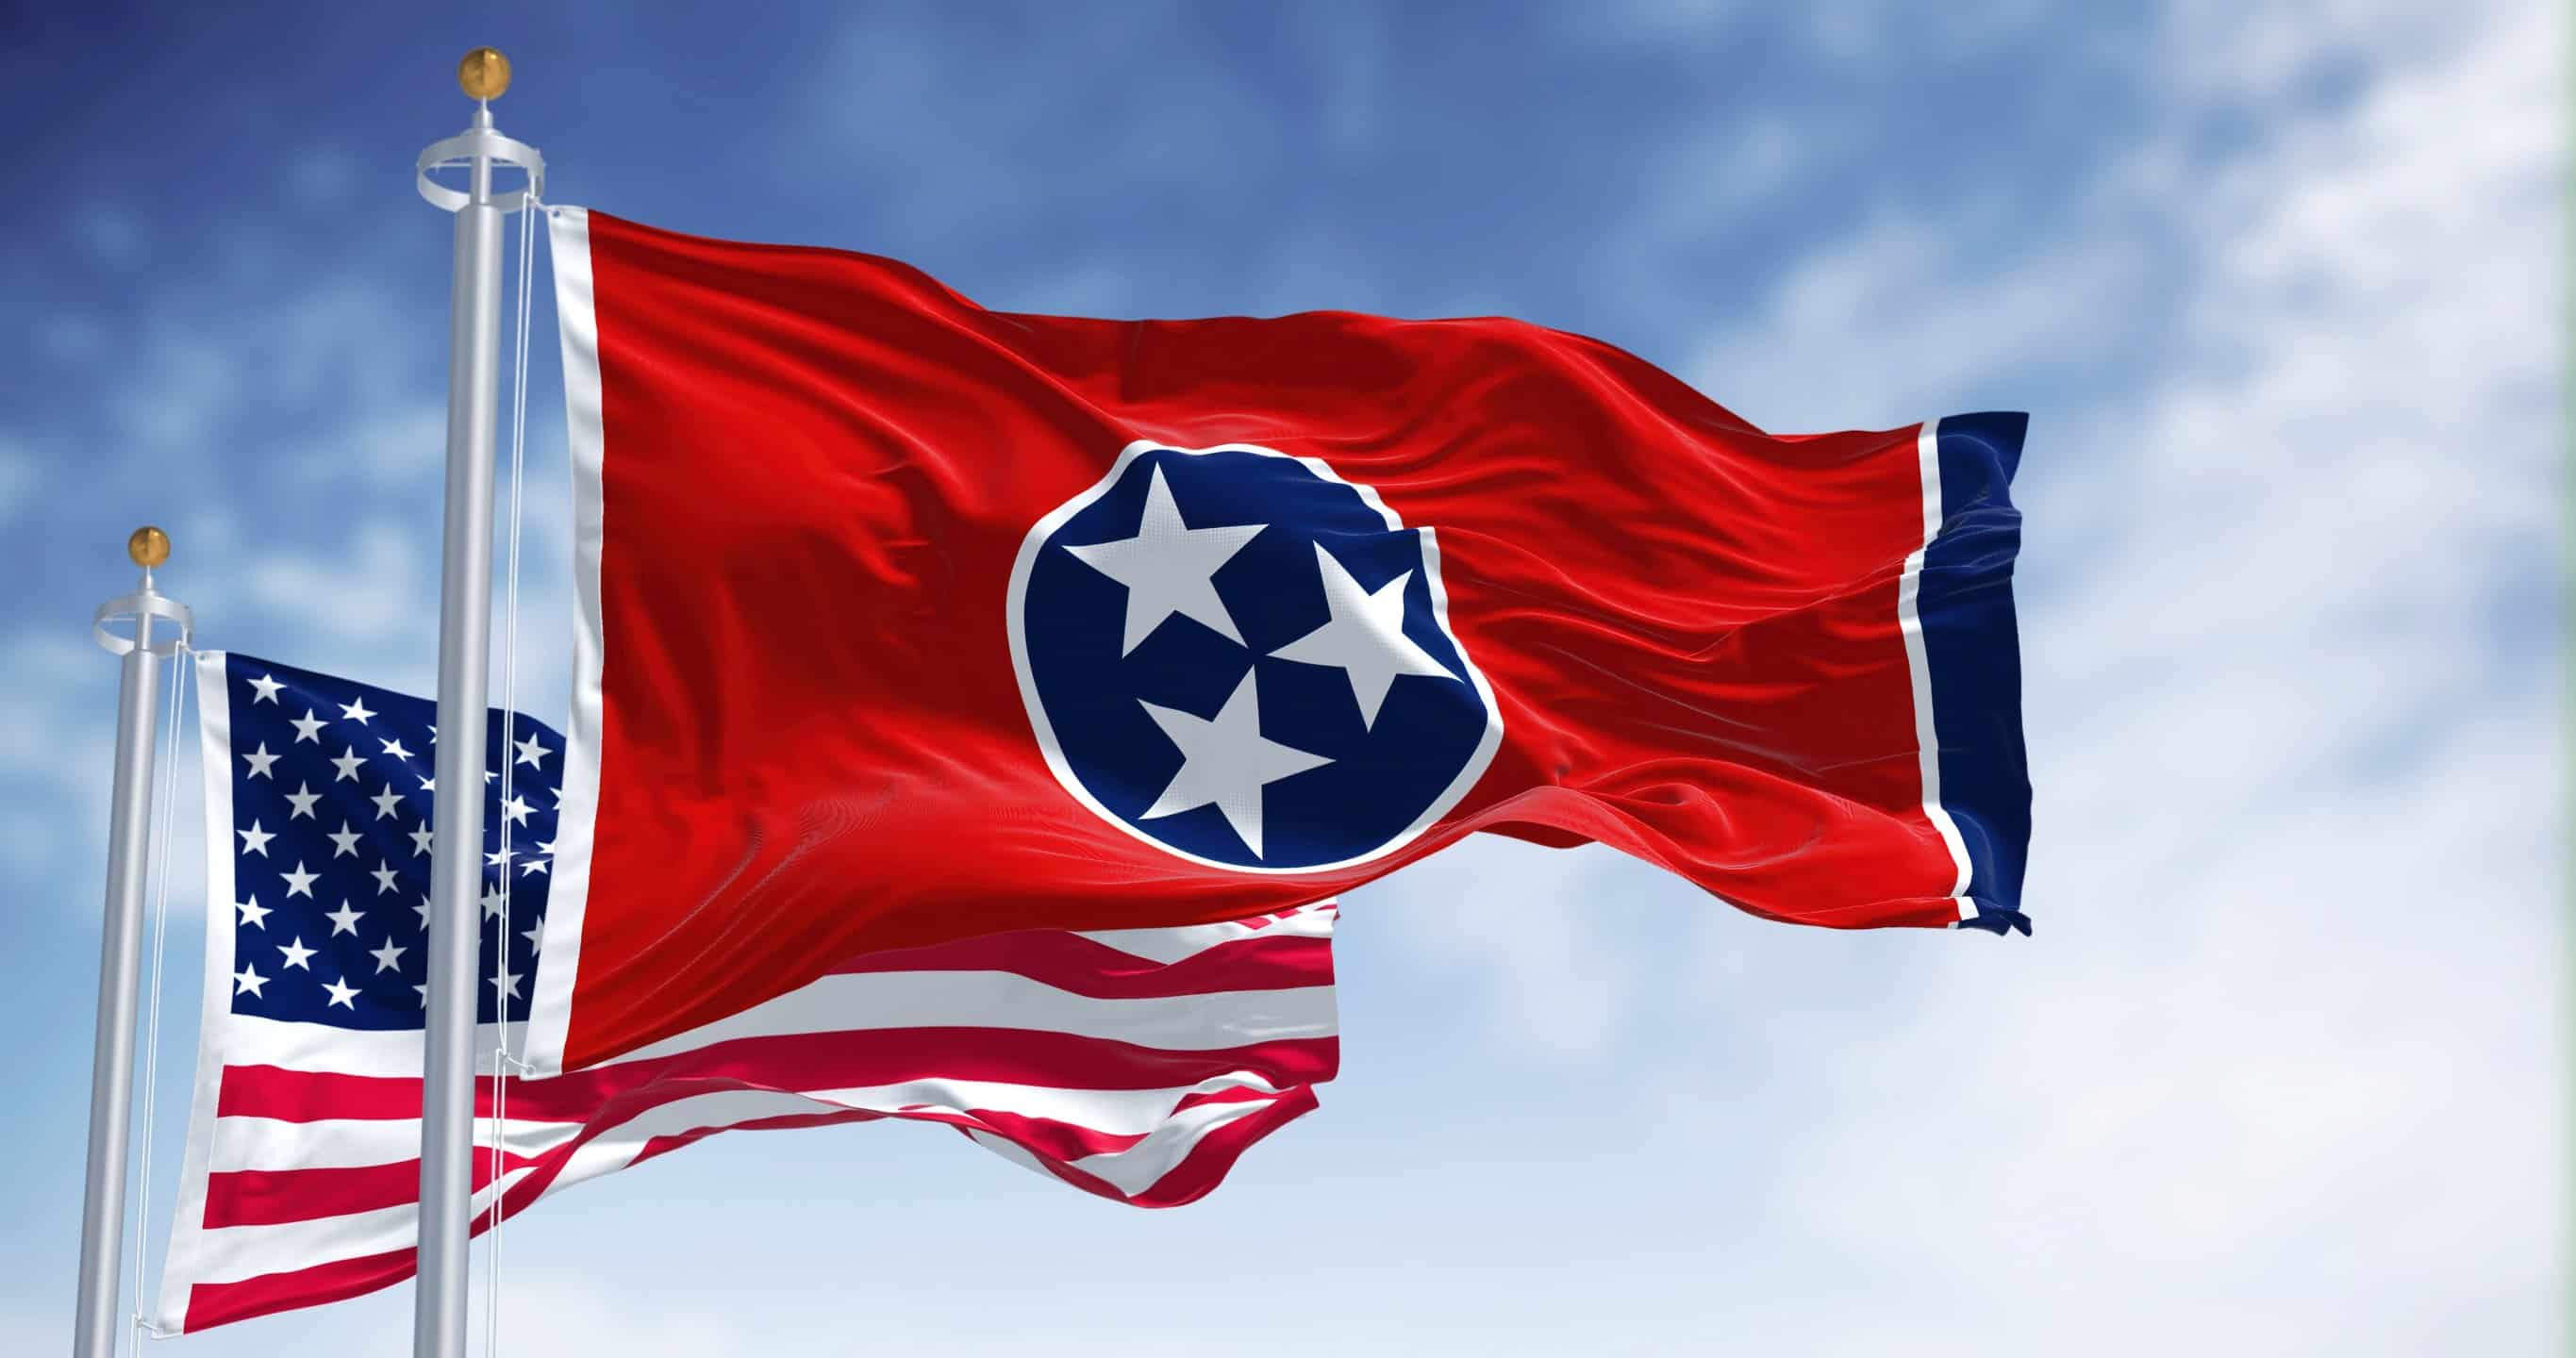 The Tennessee State Flag With The American Flag